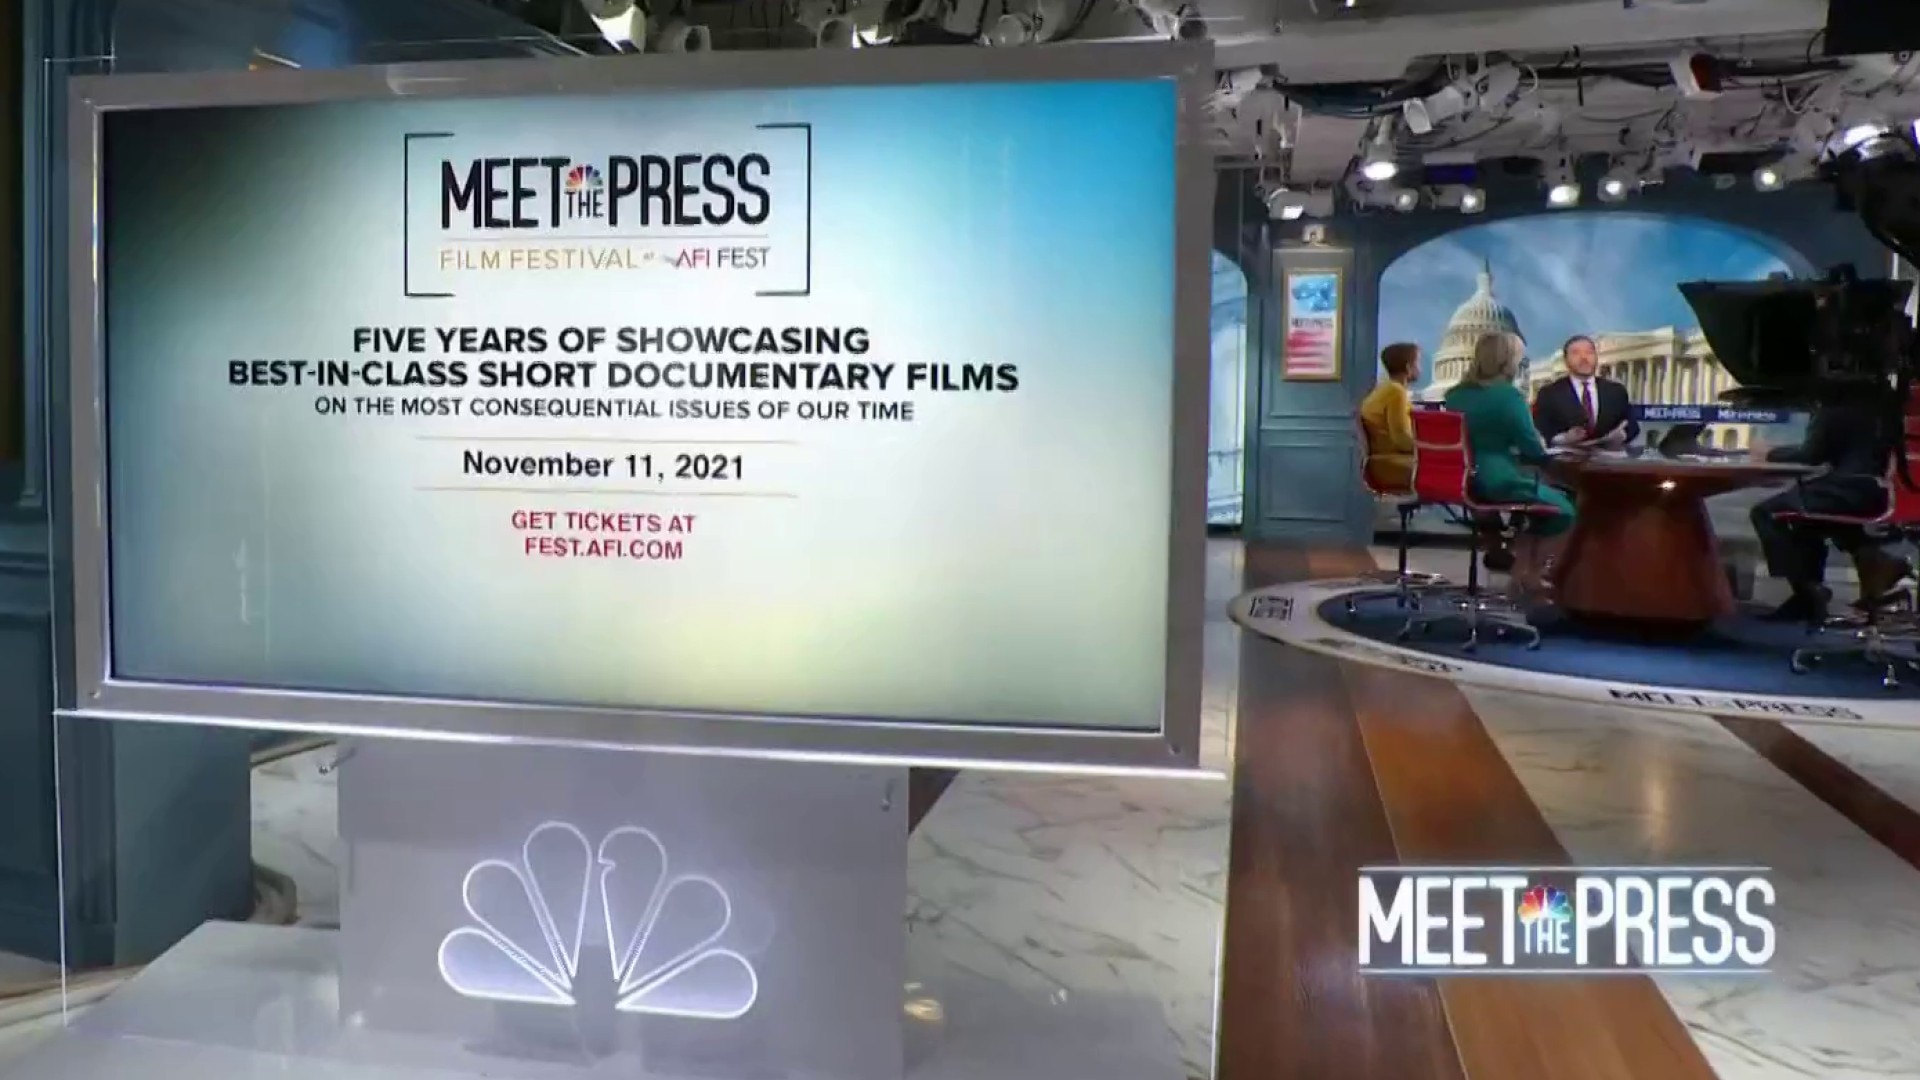 Watch Meet the Press Excerpt Meet the Press Film Festival Live and